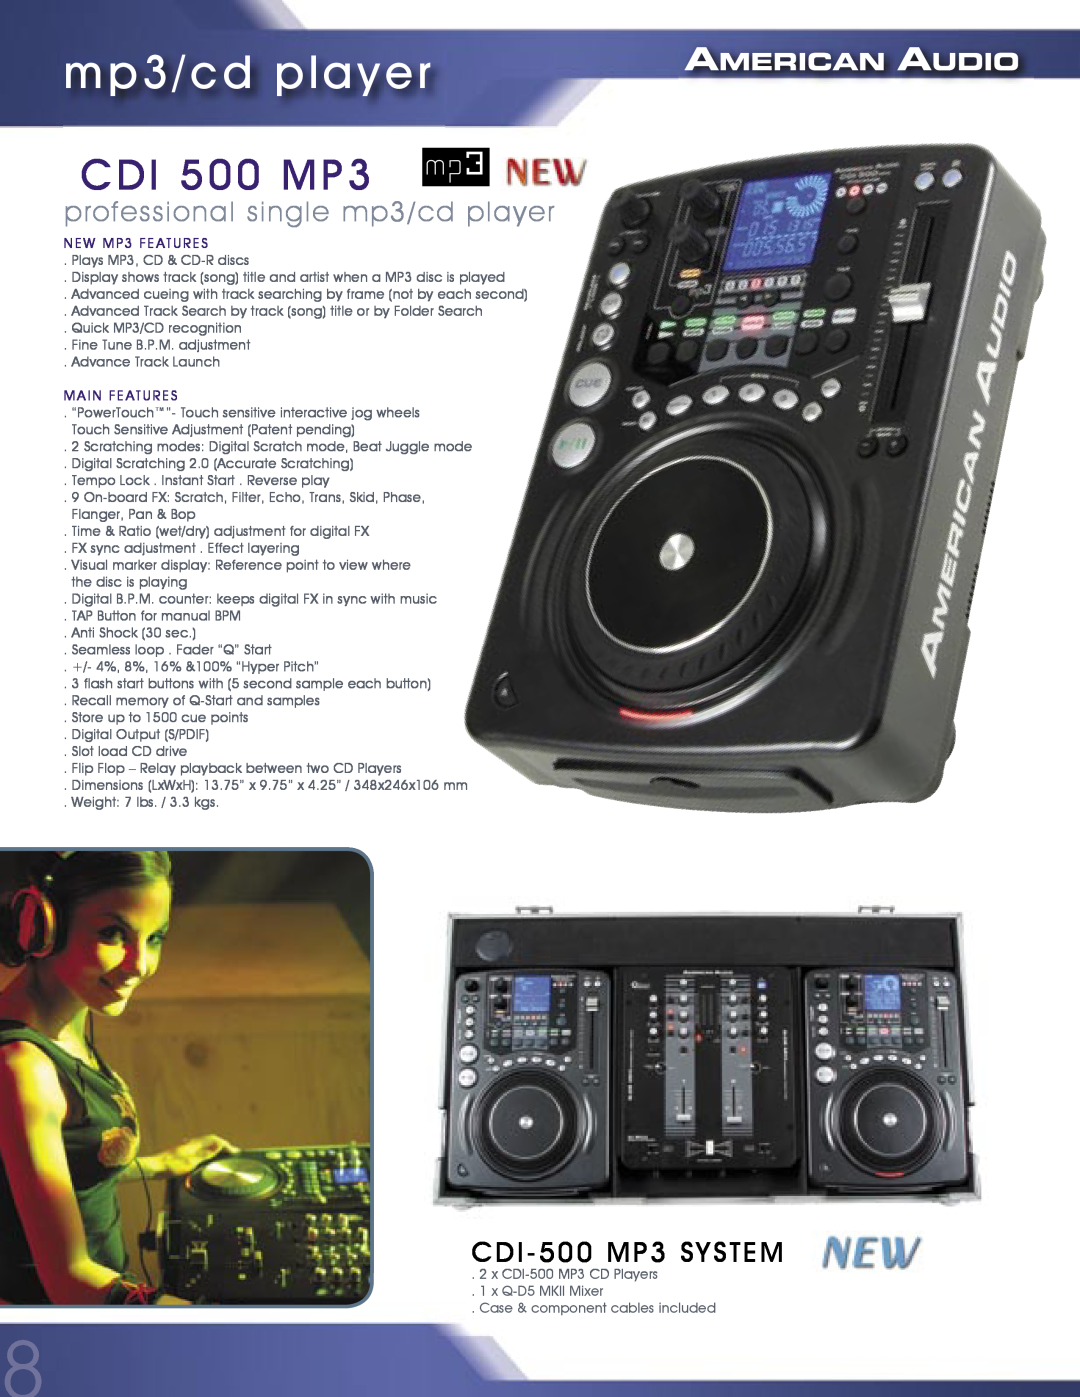 American Audio MCD-810 CDI 500 MP3, professional single mp3/cd player, CDI-500MP3 SYSTEM, NEW MP3 FEATURES, Main Features 